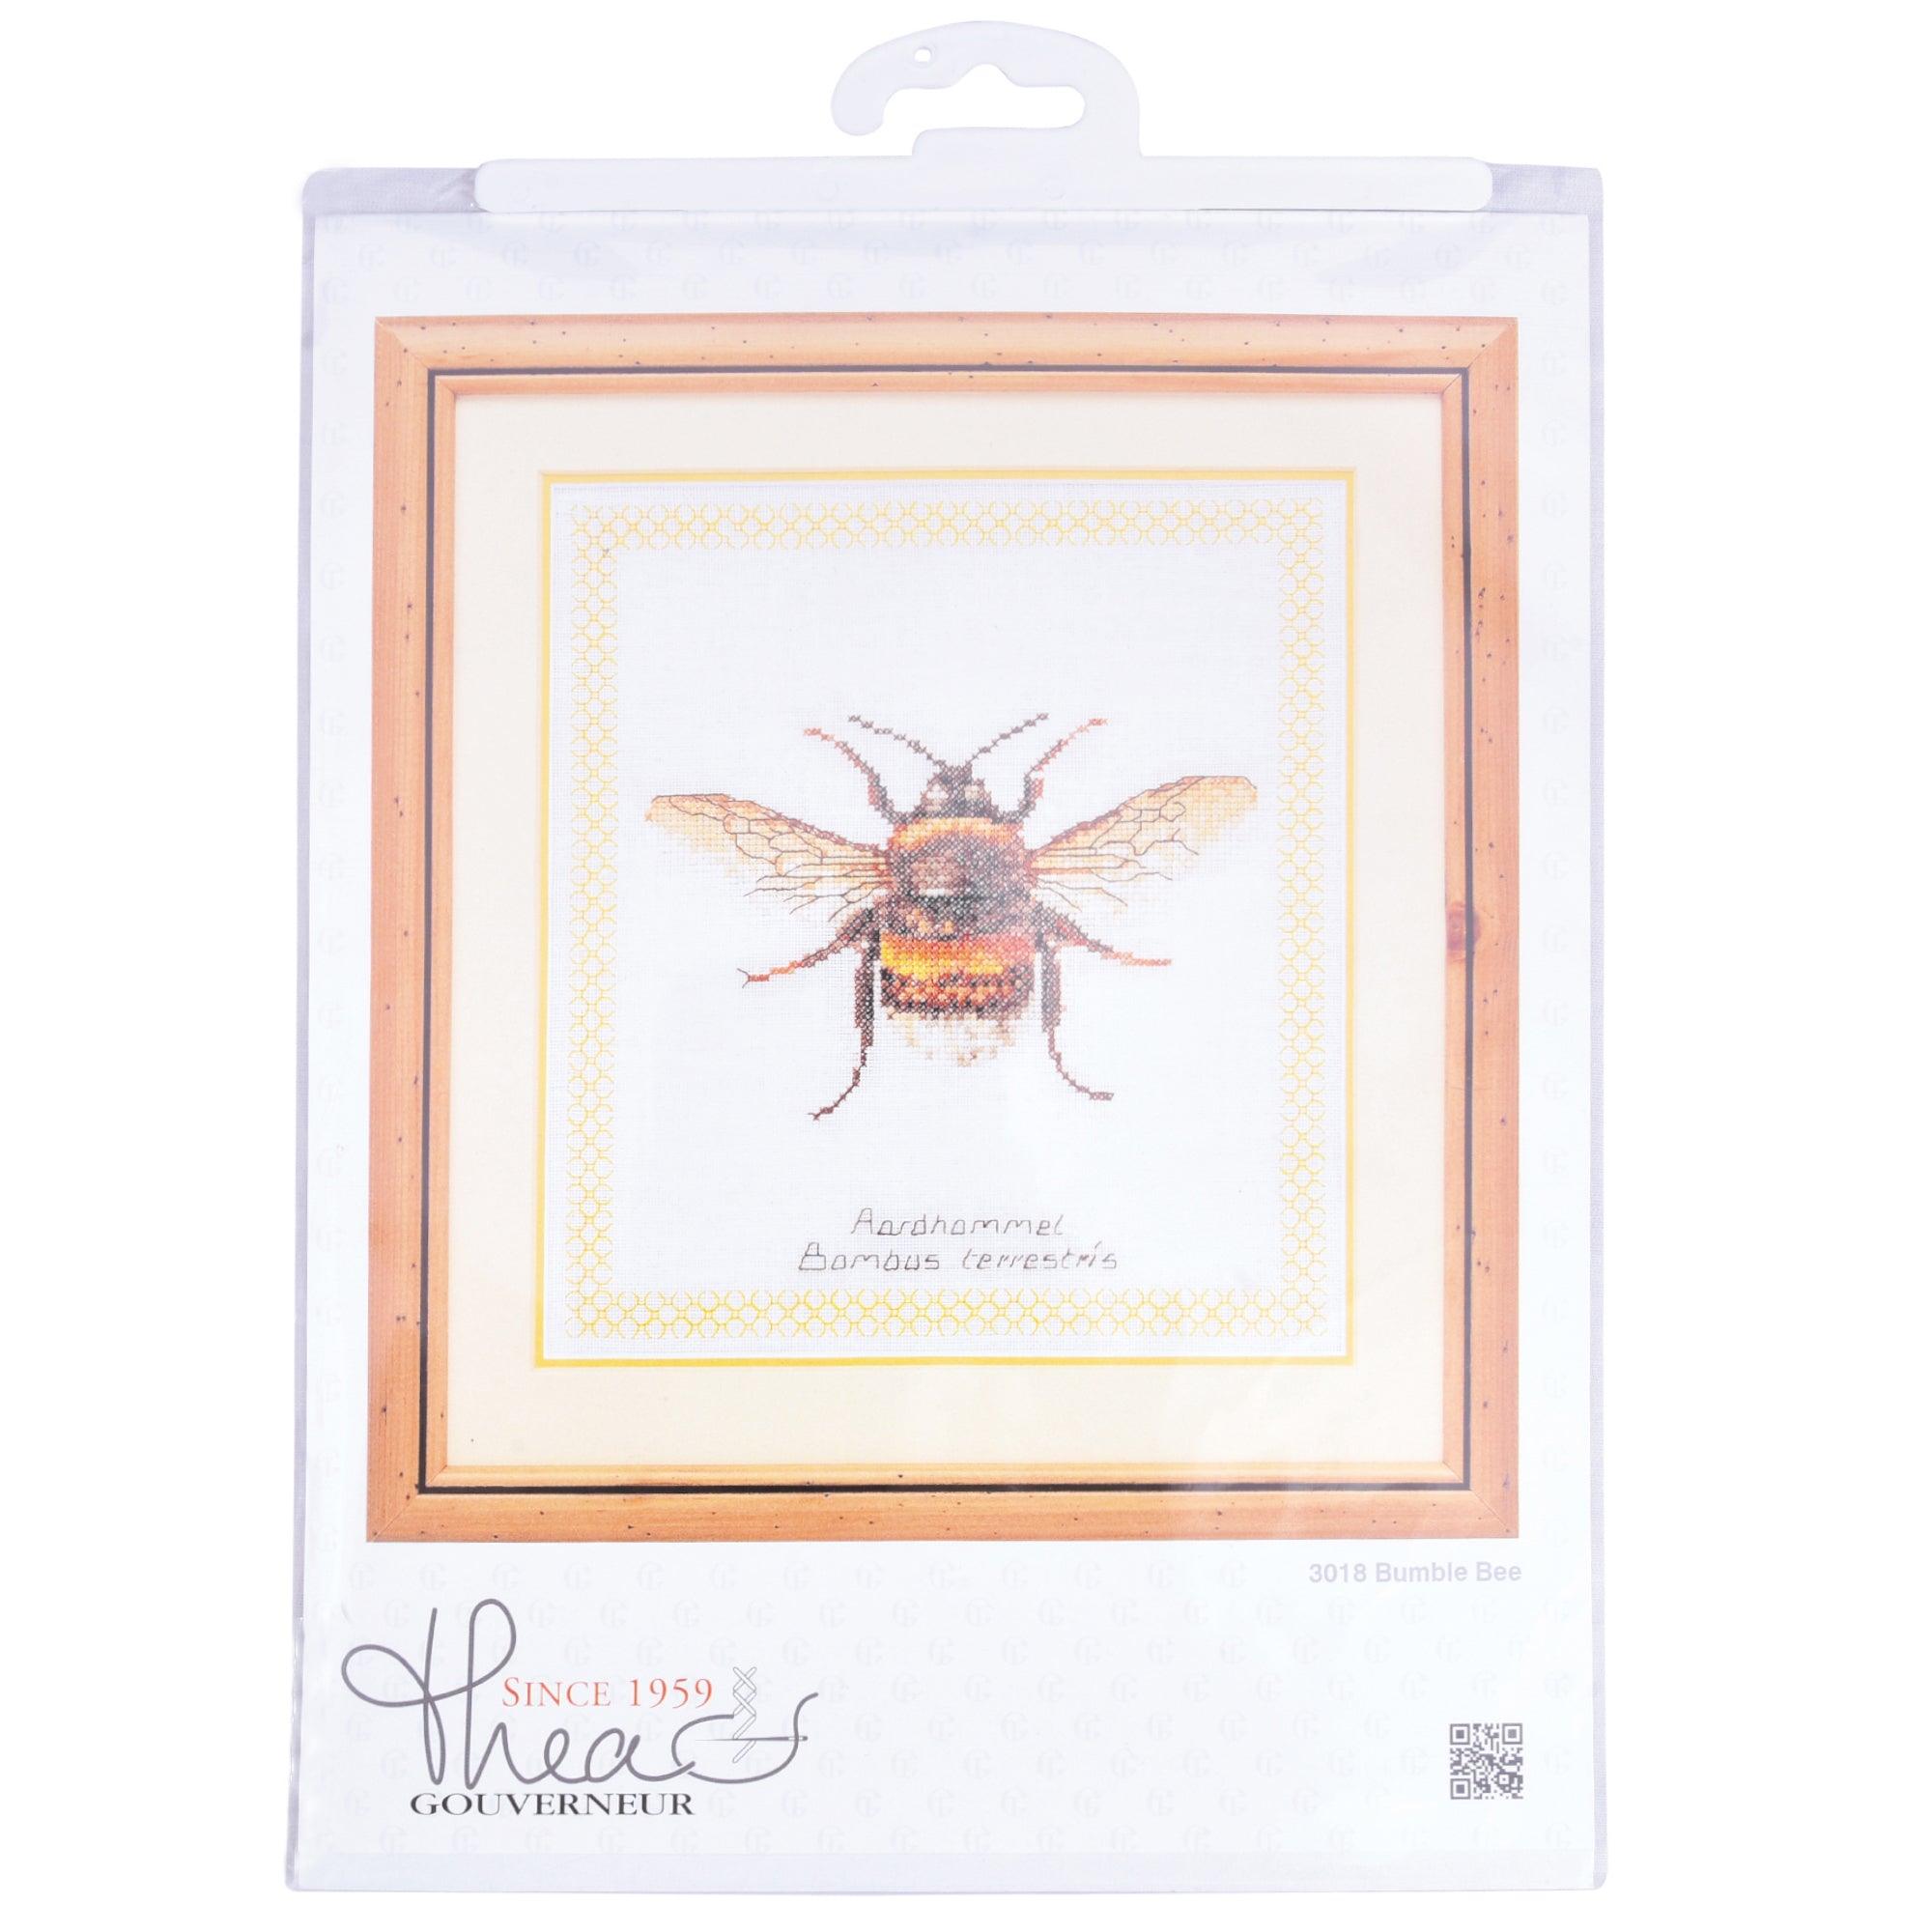 Thea Gouverneur - Counted Cross Stitch Kit - Bumble Bee - Aida - 16 count - 3018A - Thea Gouverneur Since 1959